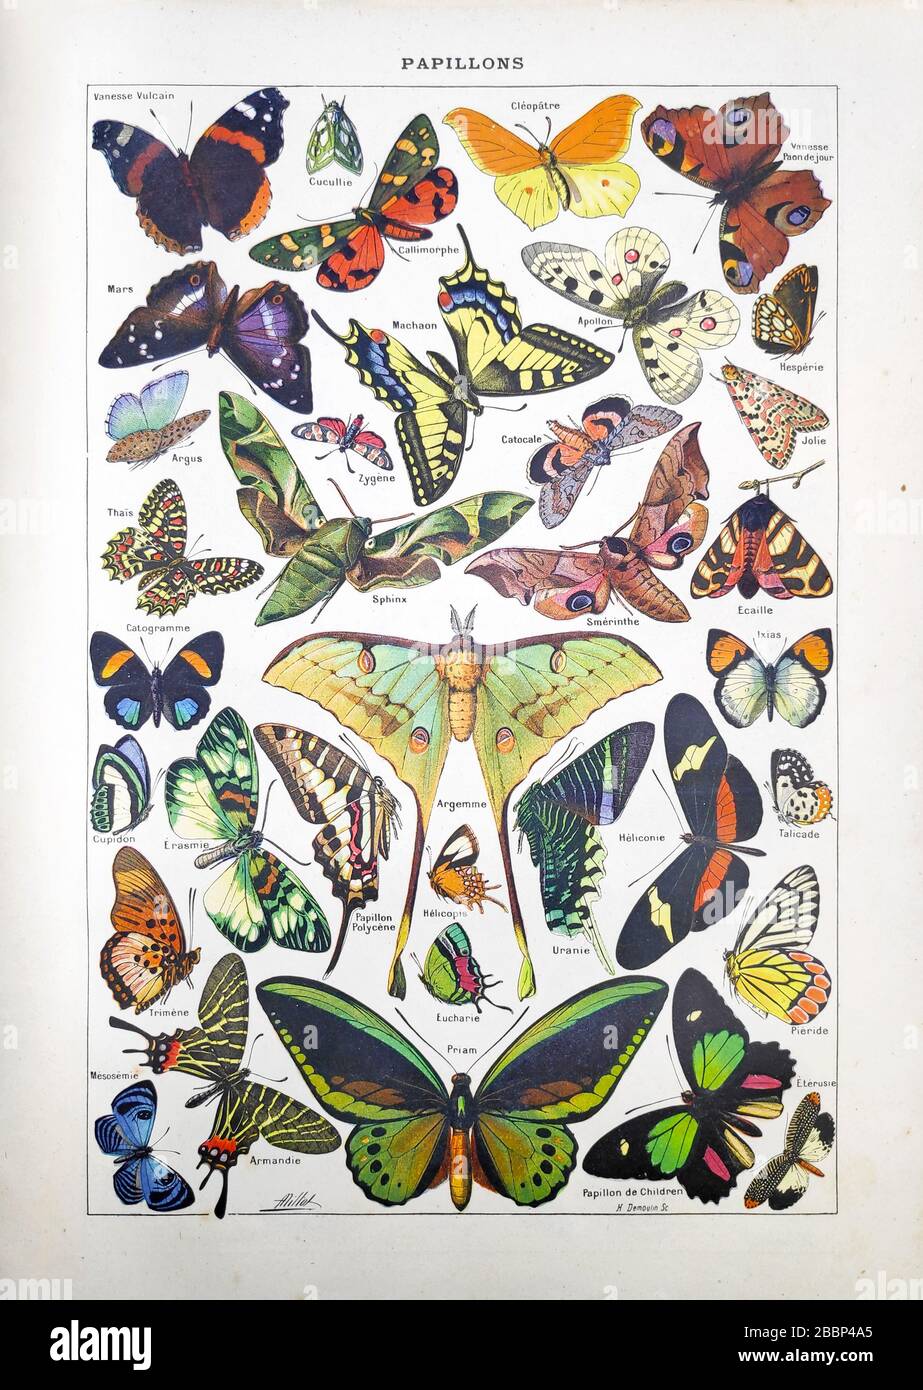 Old illustration about butterflies by Adolphe Philippe Millot printed in the late 19th century. Stock Photo